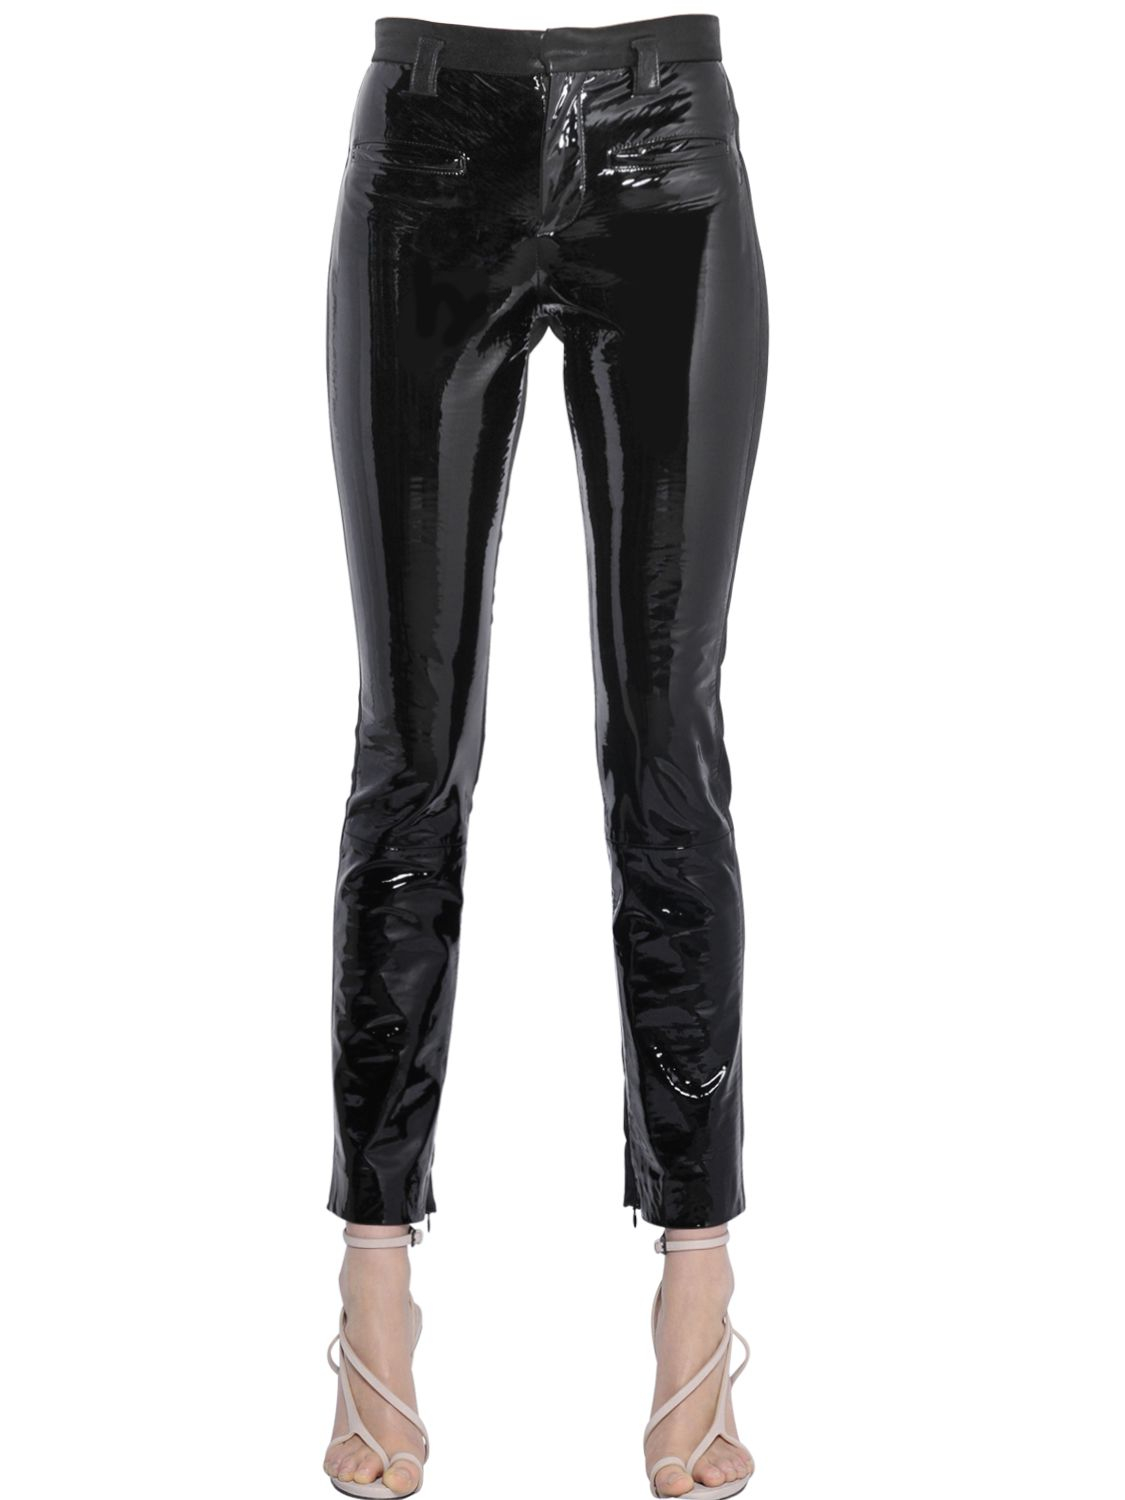 Lyst - Haider Ackermann Patent & Leather Pants in Black